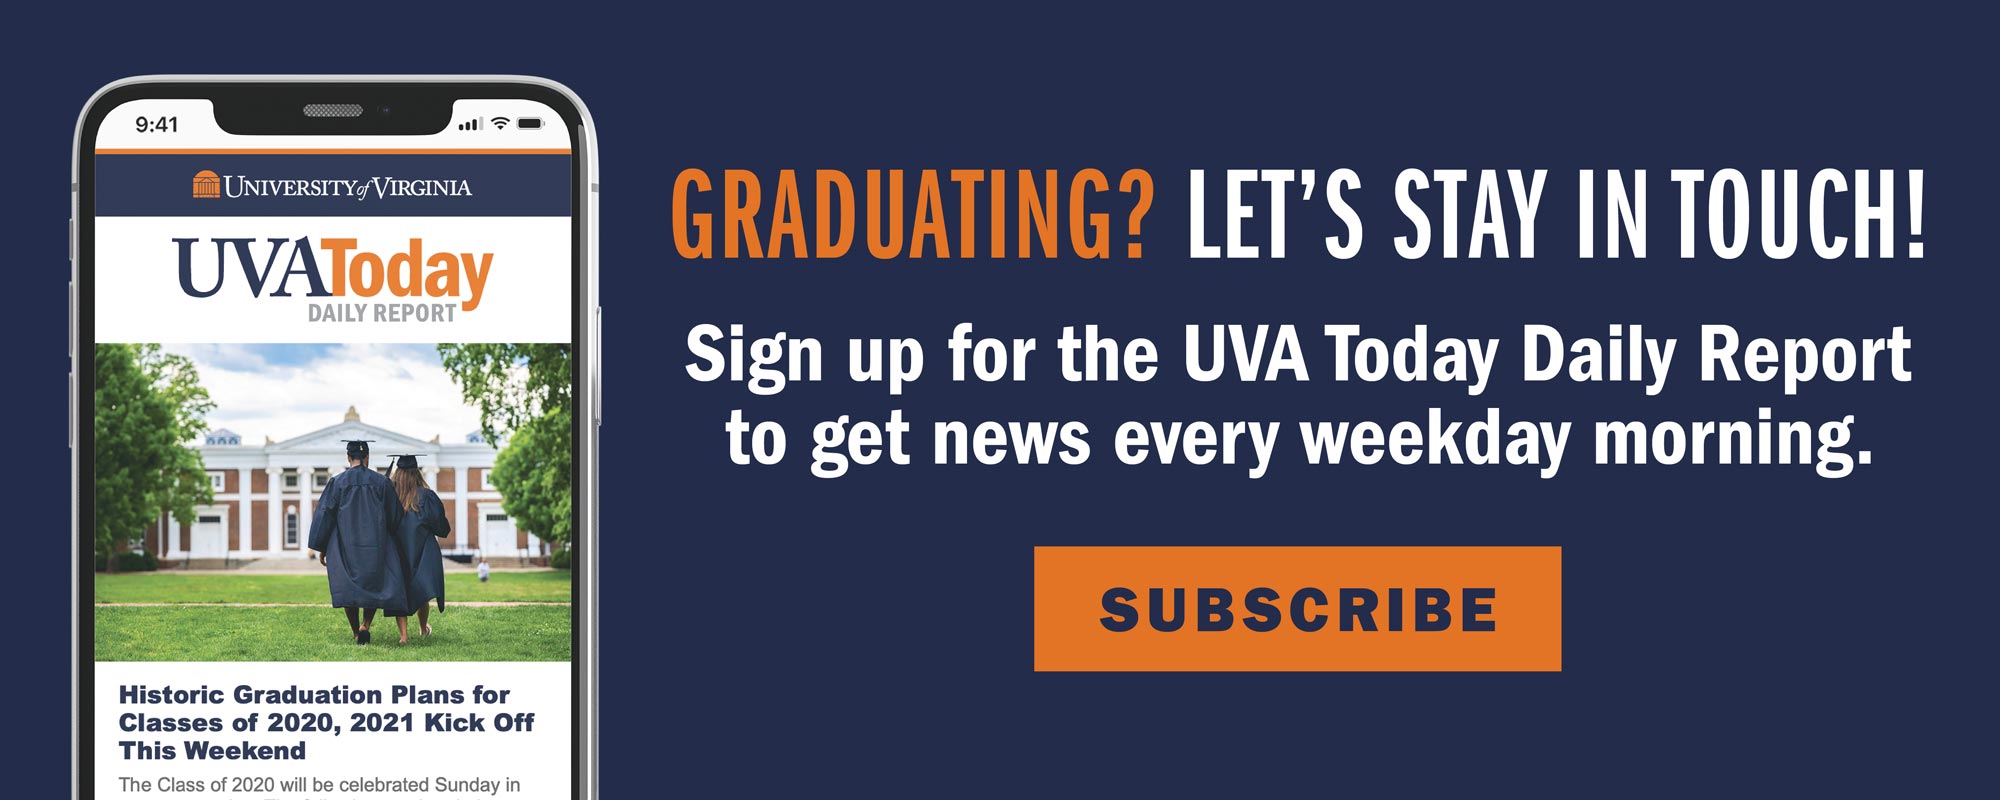 Text reads: Graduating? Let's stay in touch!  Sign up for the UVA Today Daily Report to get news every weekday morning!  Subscribe